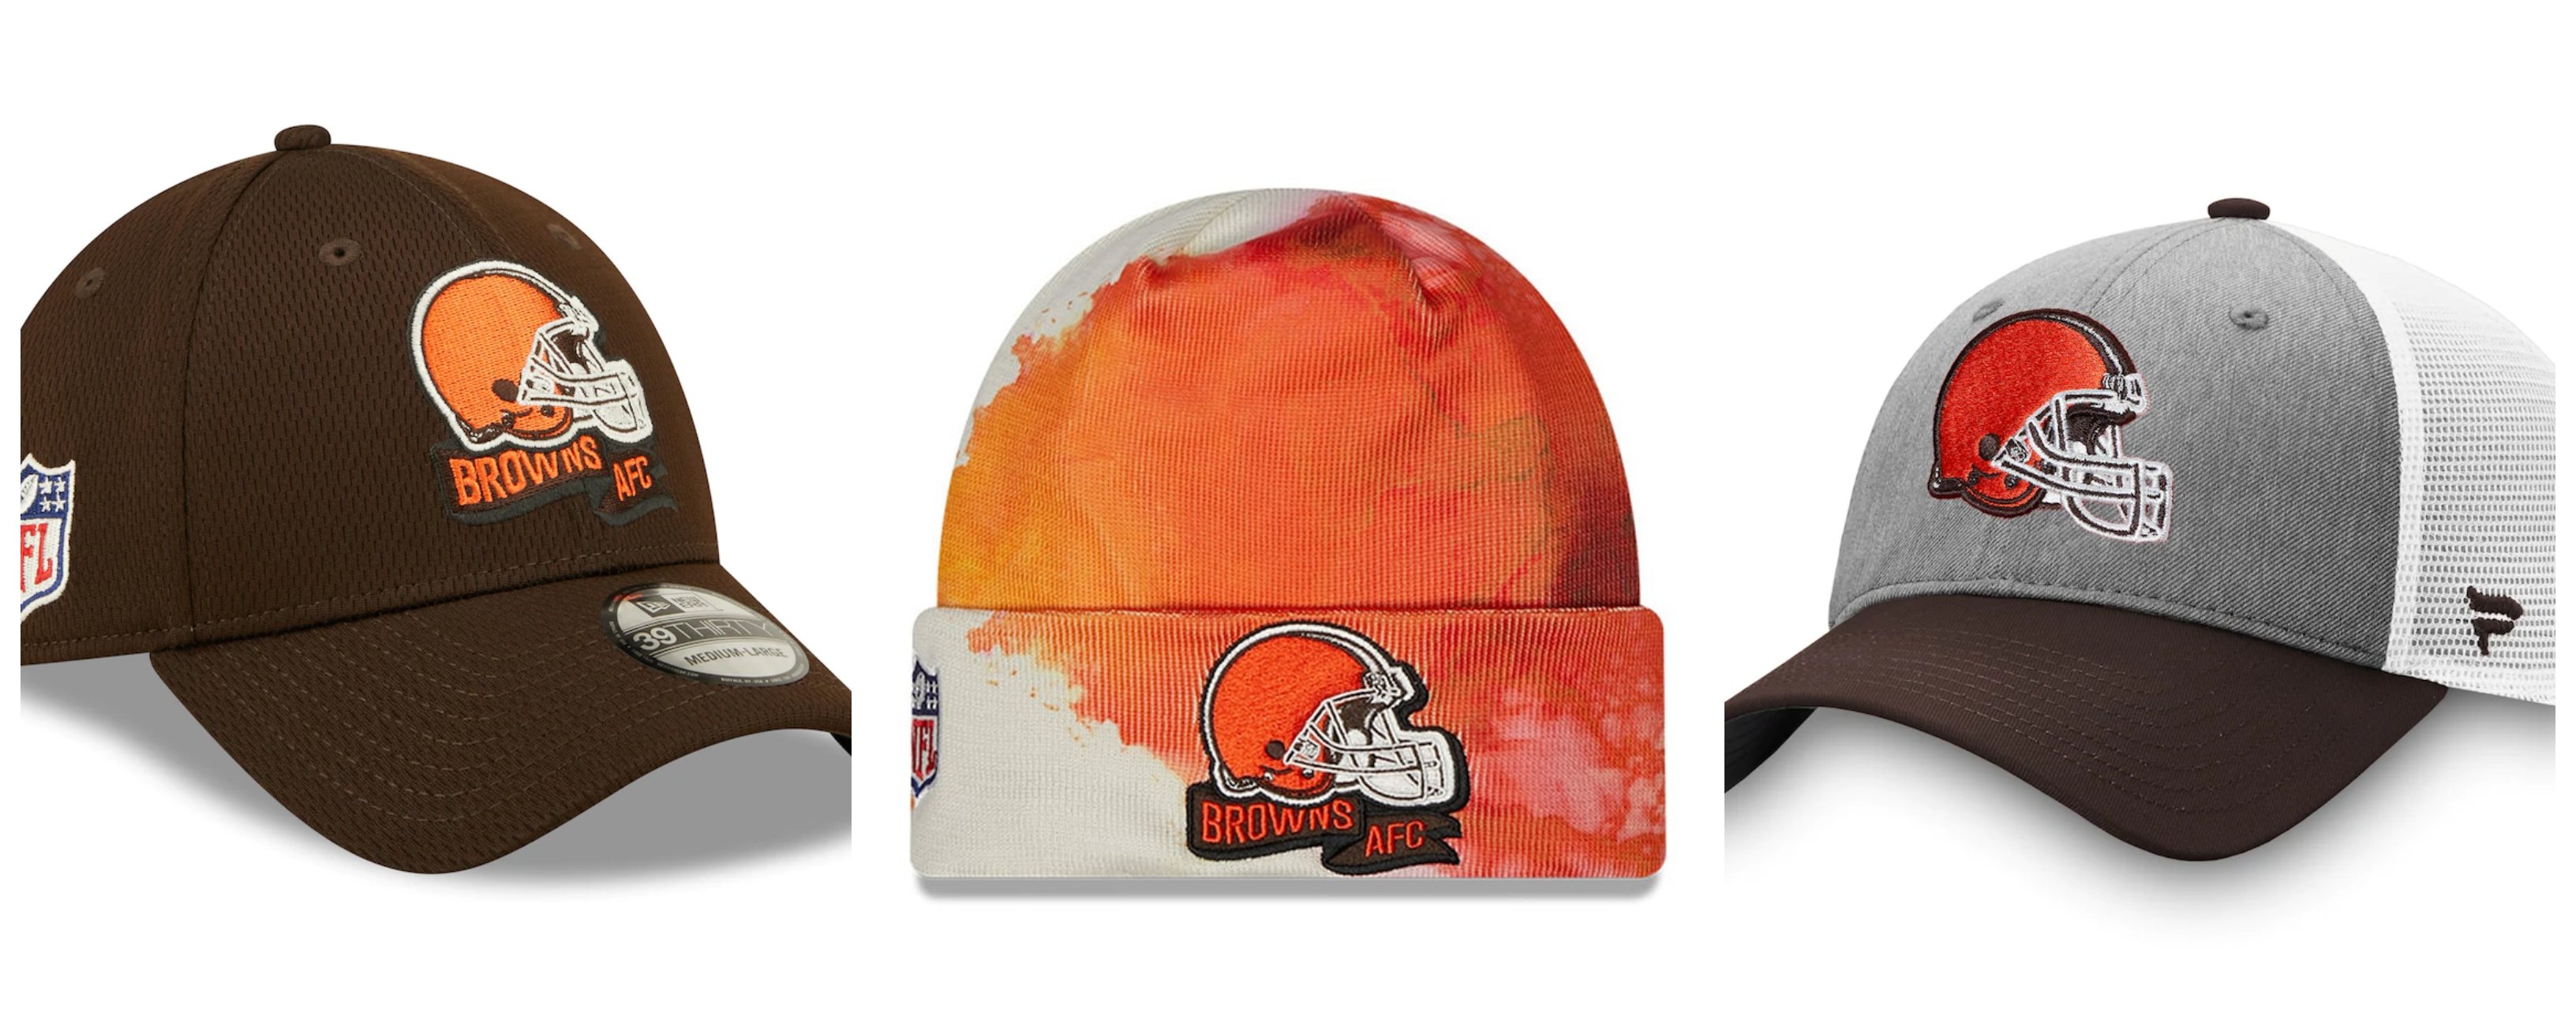 Cleveland Browns sideline hats just dropped